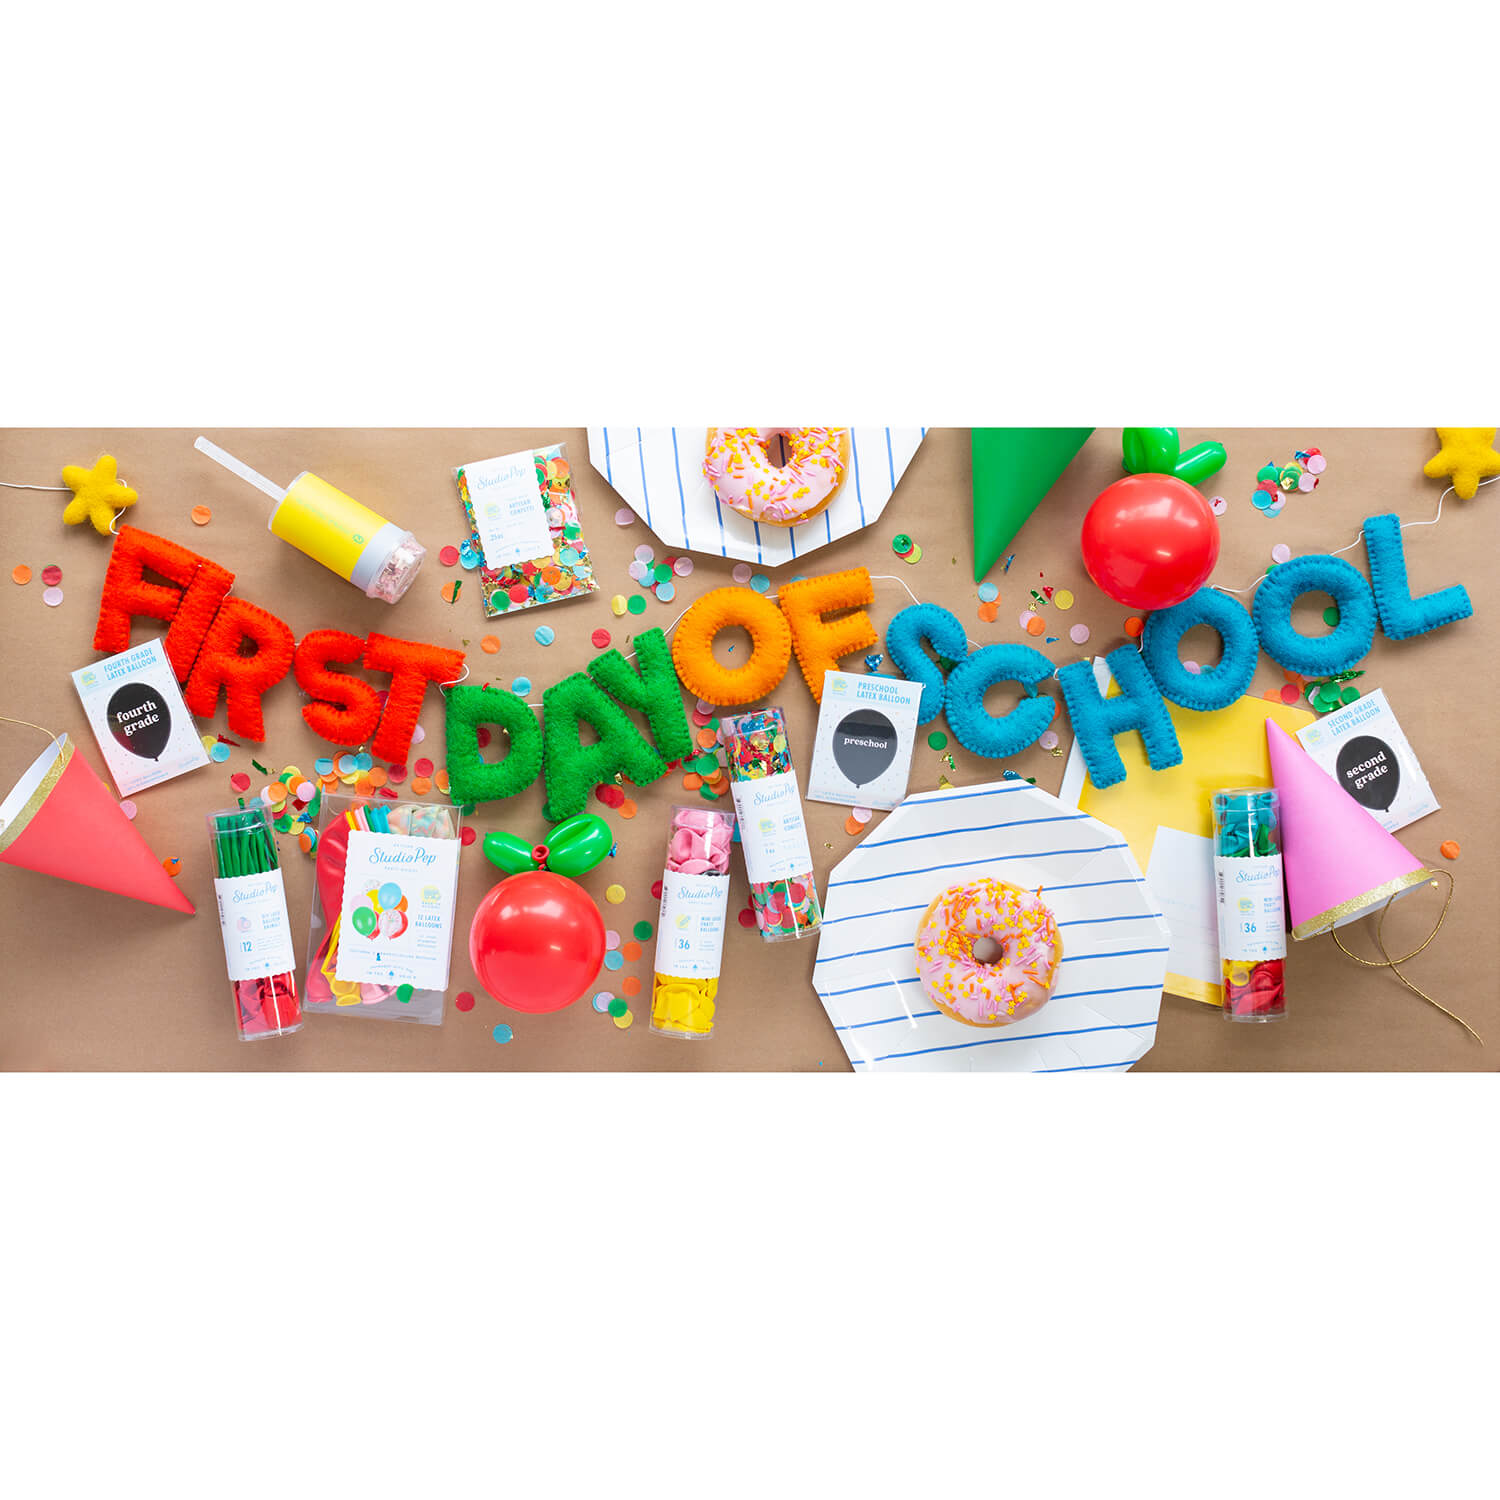 A back to school first day of school party table with Studiopep first day of school felt banner in multiple bright and vibrant colors and Apples Balloon and themed confetti to celebrate kid's start of a new school year